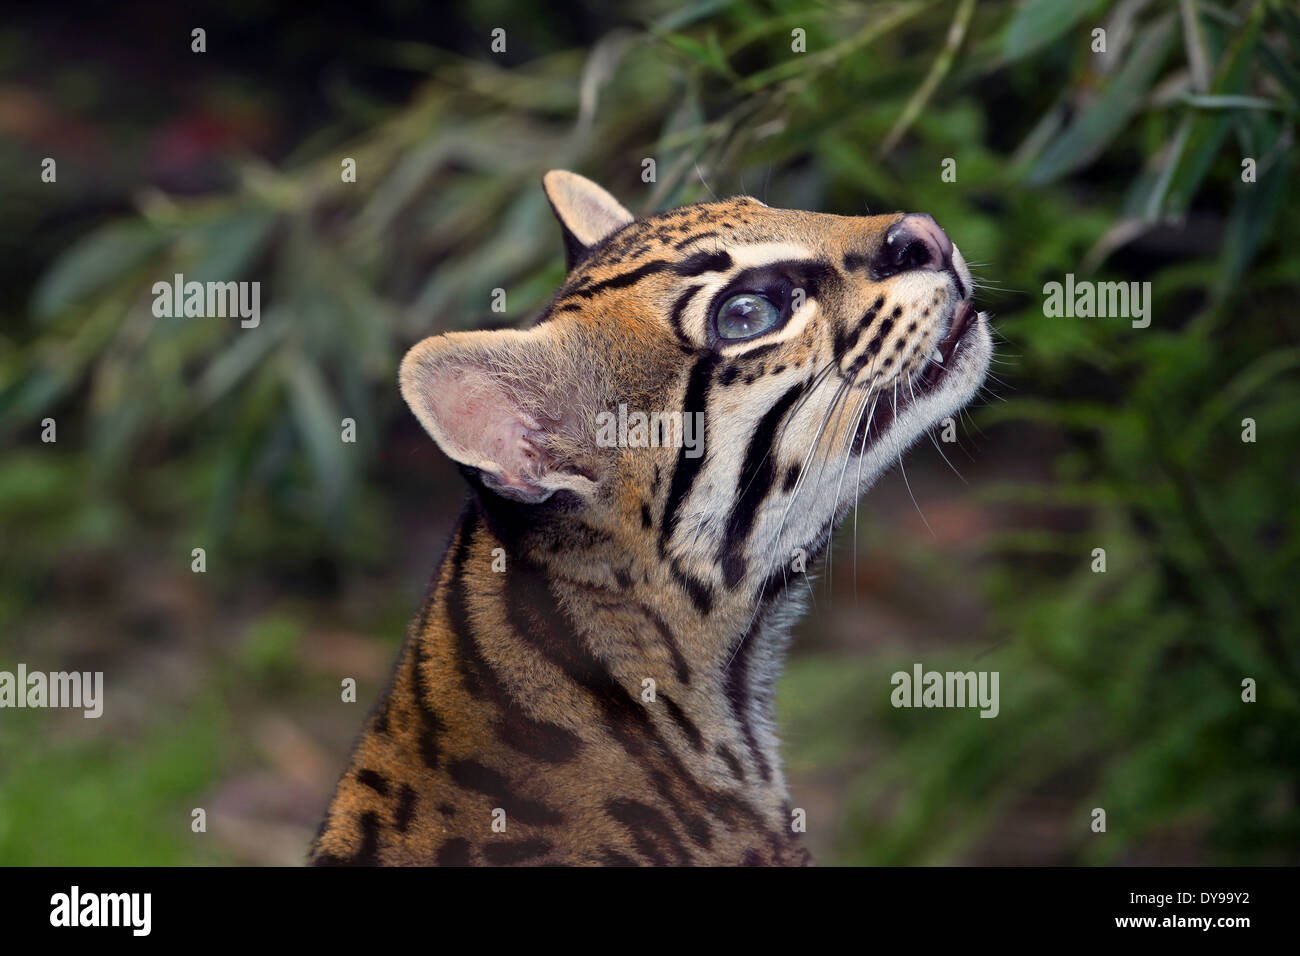 Ocelot (Leopardus pardalis) in the tropical forest Closeup while looking up Stock Photo